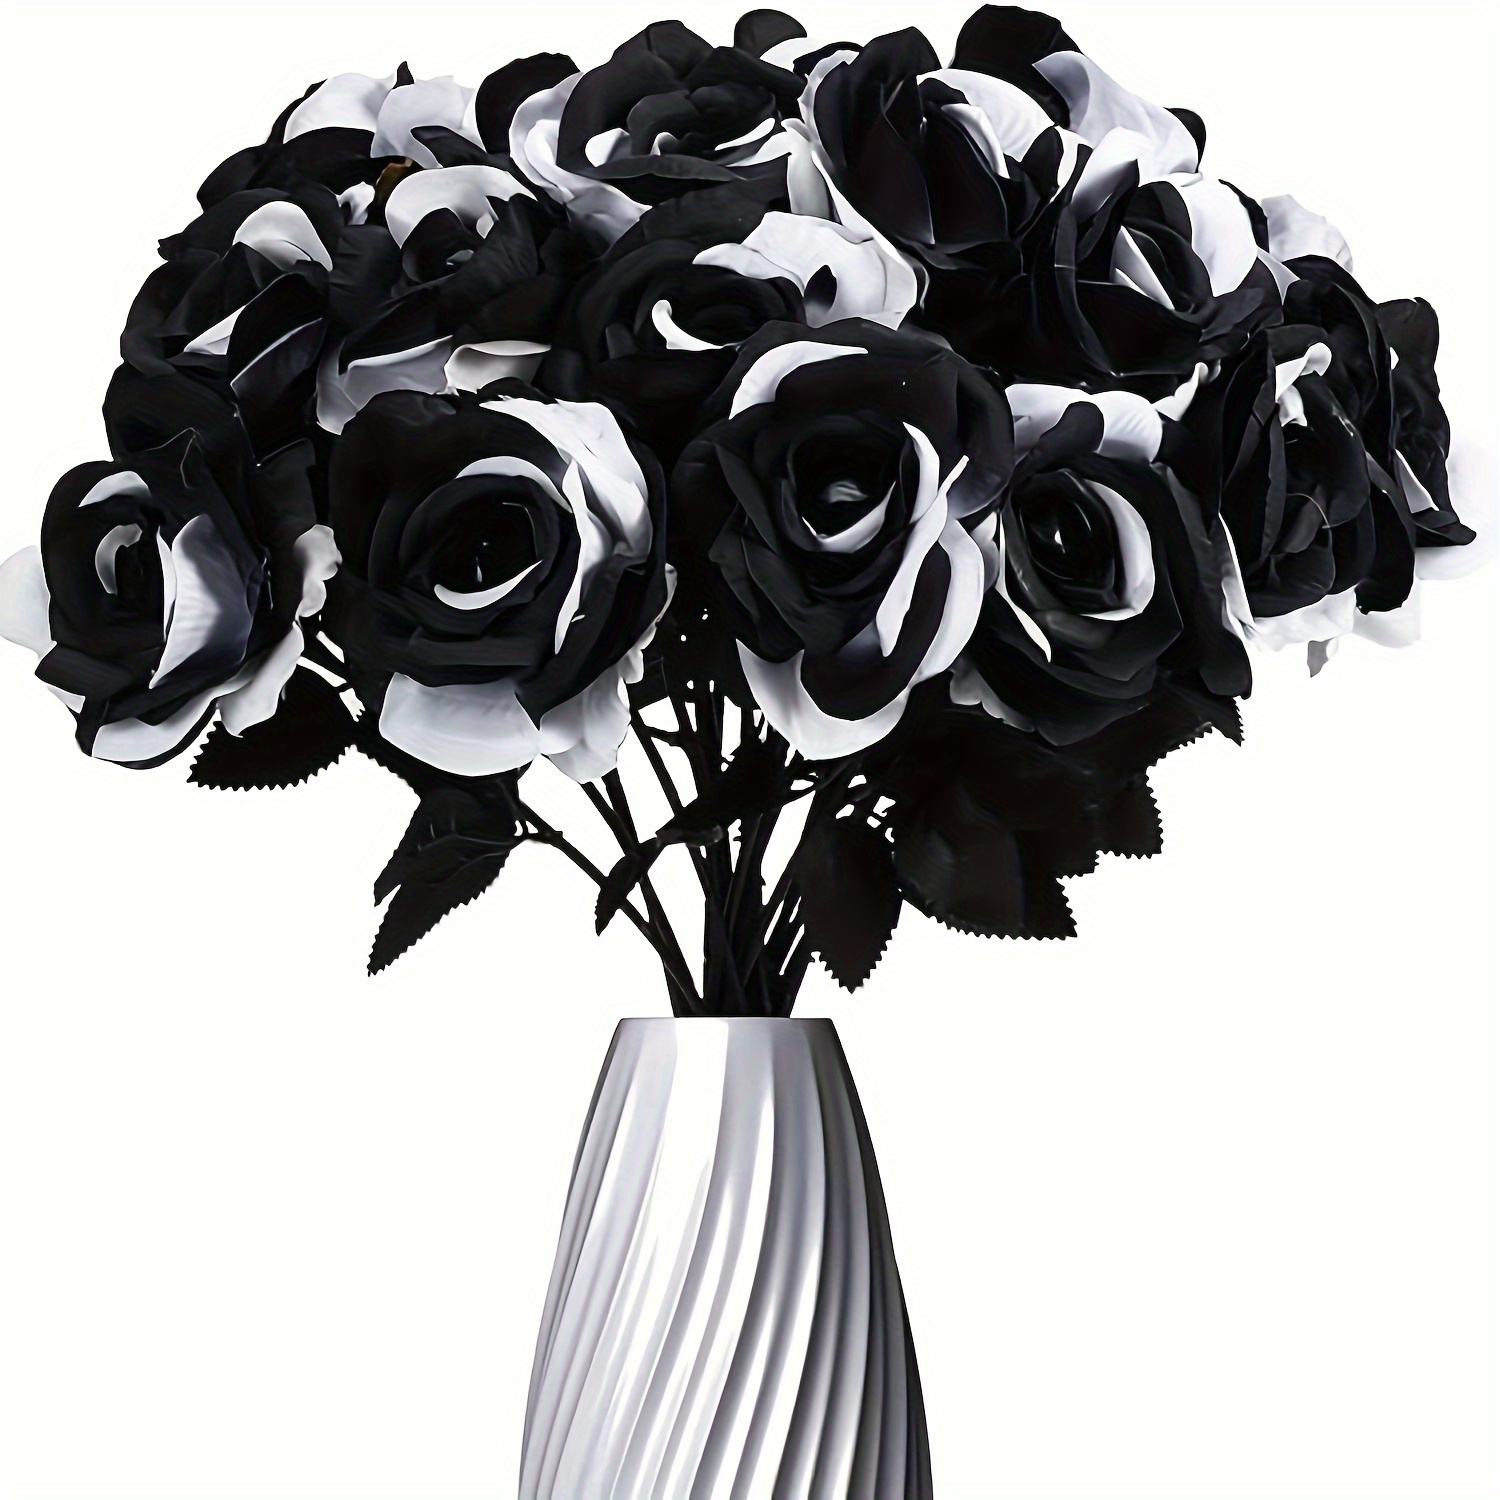 

9pcs Black Rose Artificial Flowers, Single Stemmed False Silk Flower Bridal Bouquet, Realistic Flowers For Family Garden Parties, Halloween Christmas And Valentine's Day Decorations (black And White)